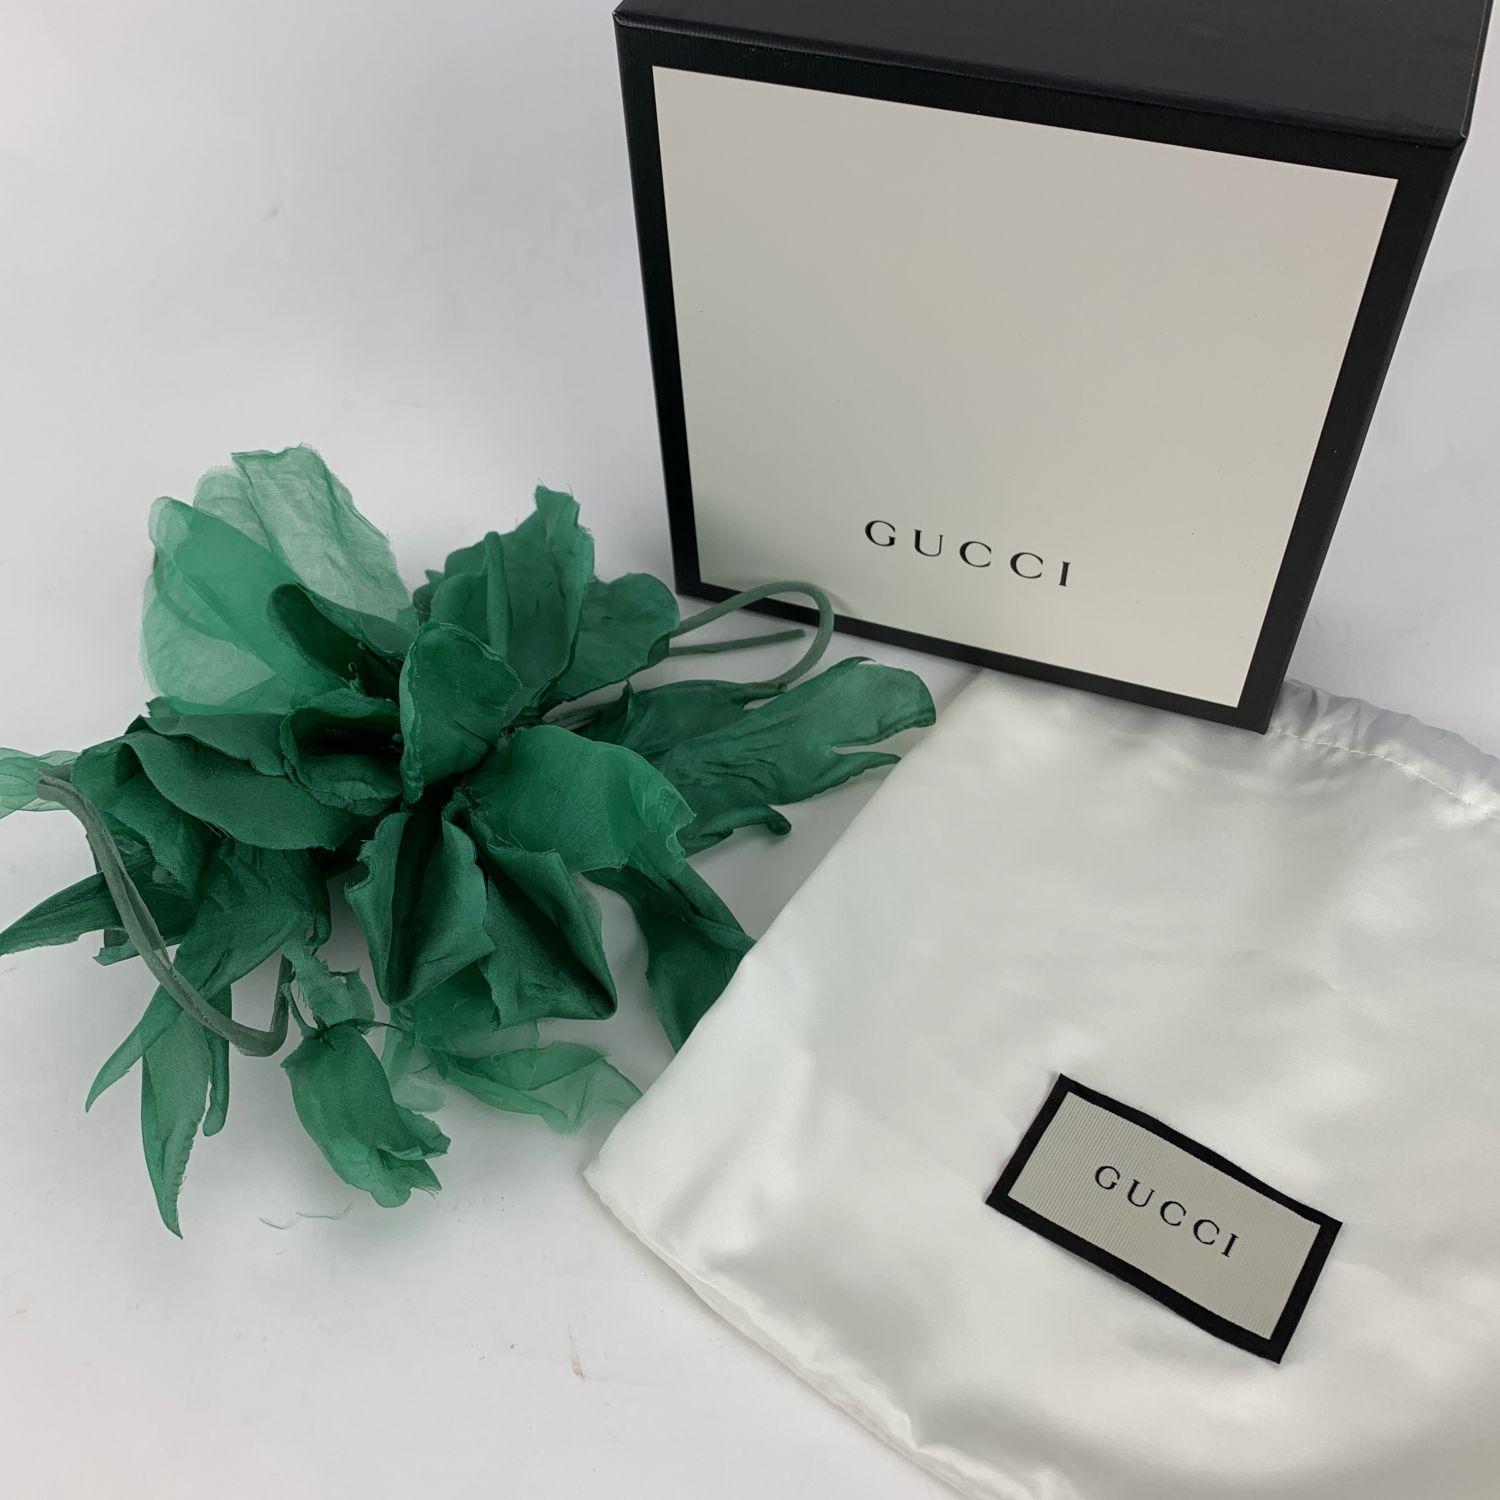 Beautiful oversized Gucci flower brooch. Green silk. Safety pin closure on the back. 'Gucci' engraved on back. Max width: 8 inches - 20.3 cm.

Condition

A+ - MINT

Never worn. Gucci box included. (Please check the photos carefully and ask if you